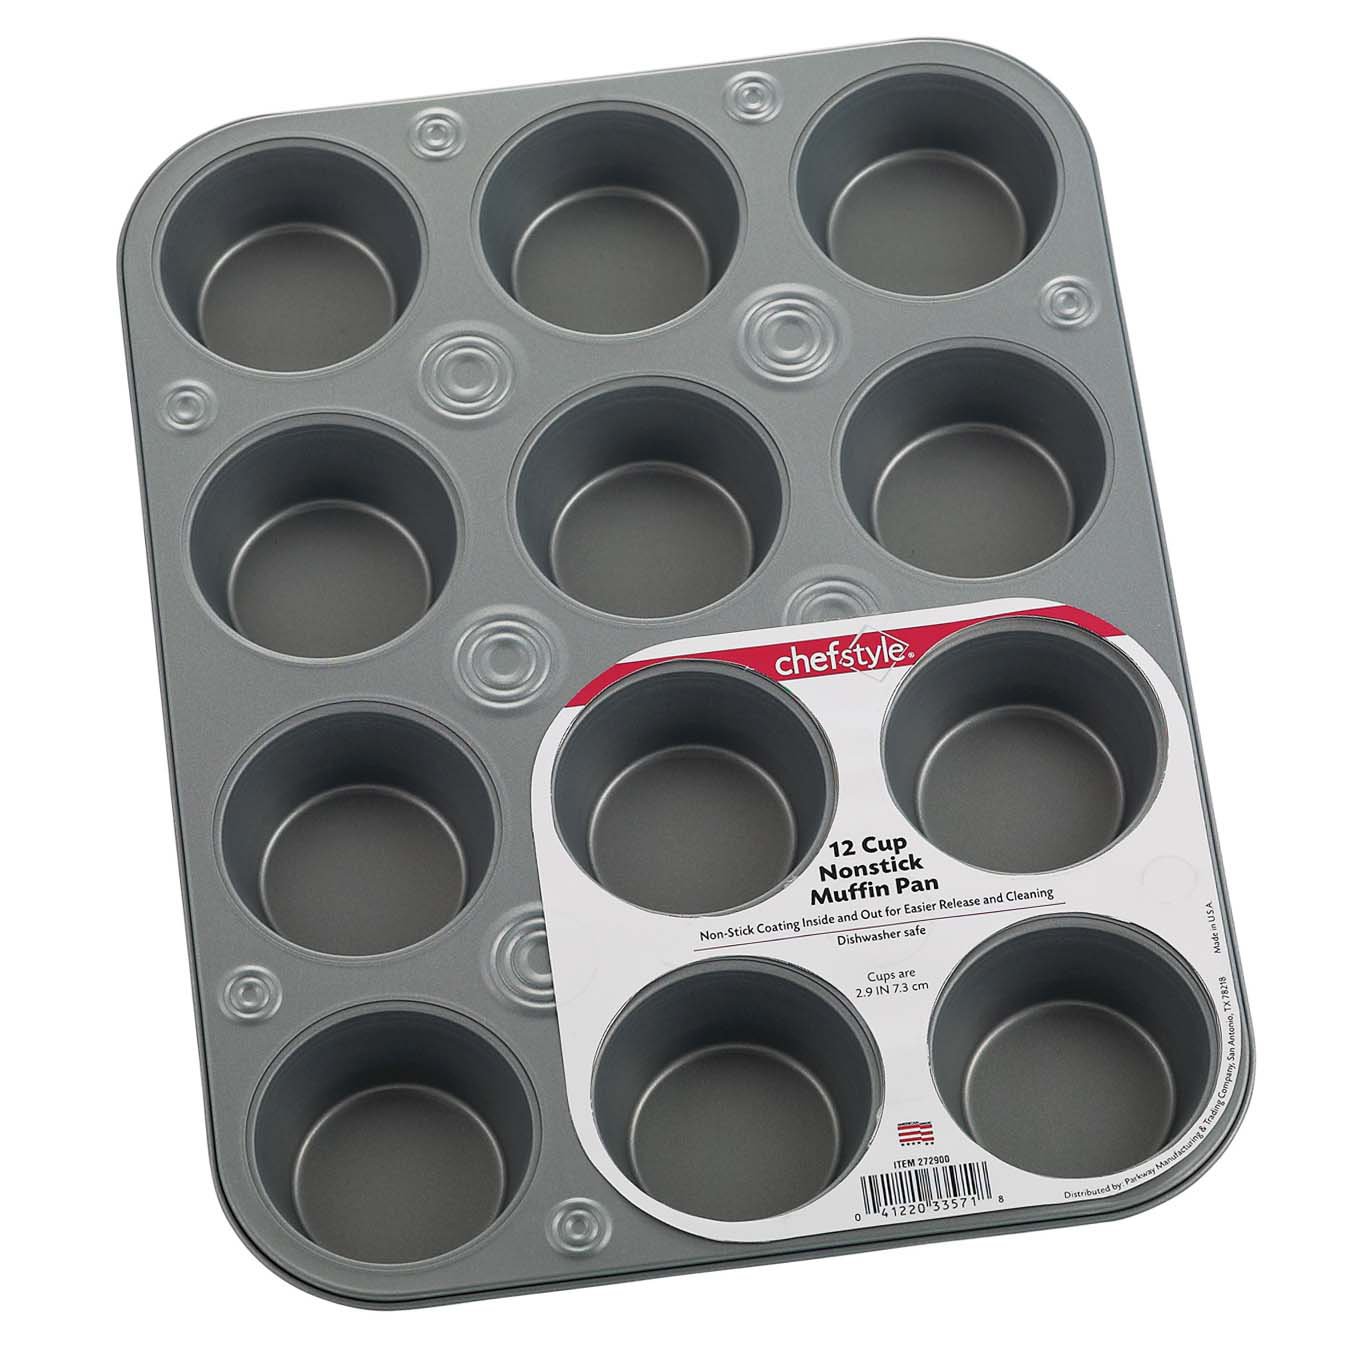 chefstyle 12 Cup Non-Stick Muffin Pan - Shop Pans & Dishes at H-E-B